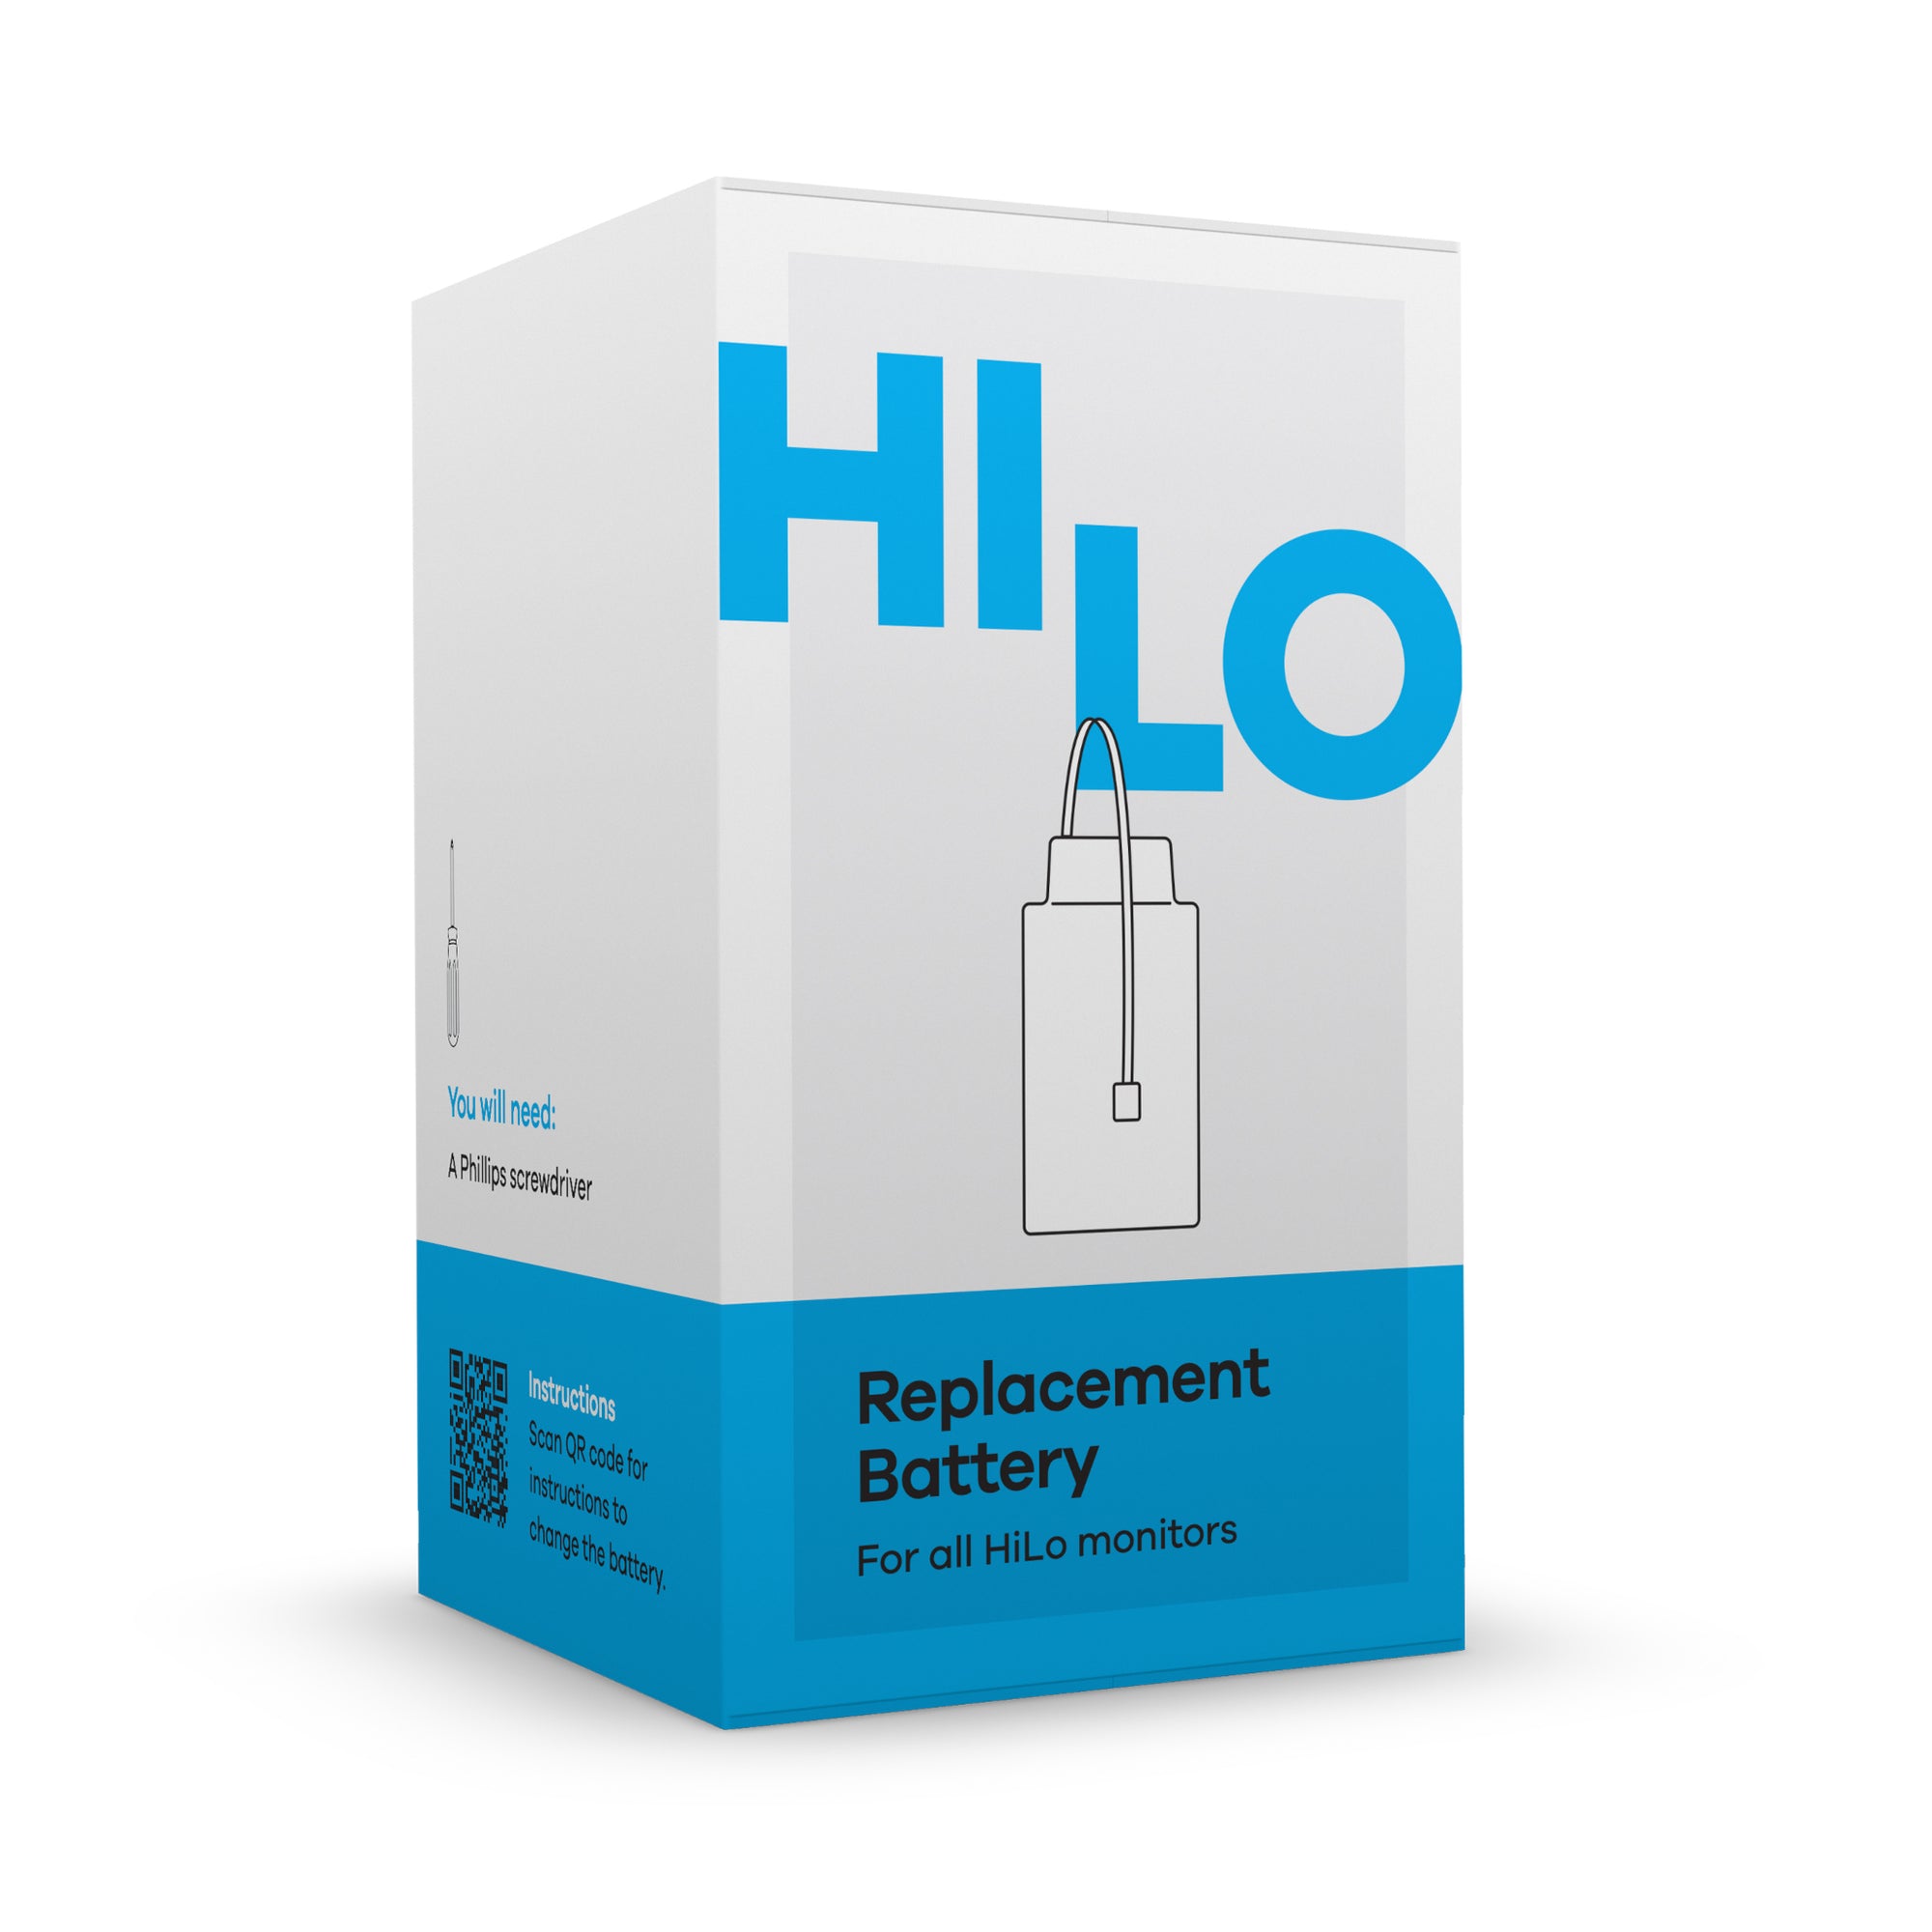 HiLo Replacement Battery (previously Waterwatch)